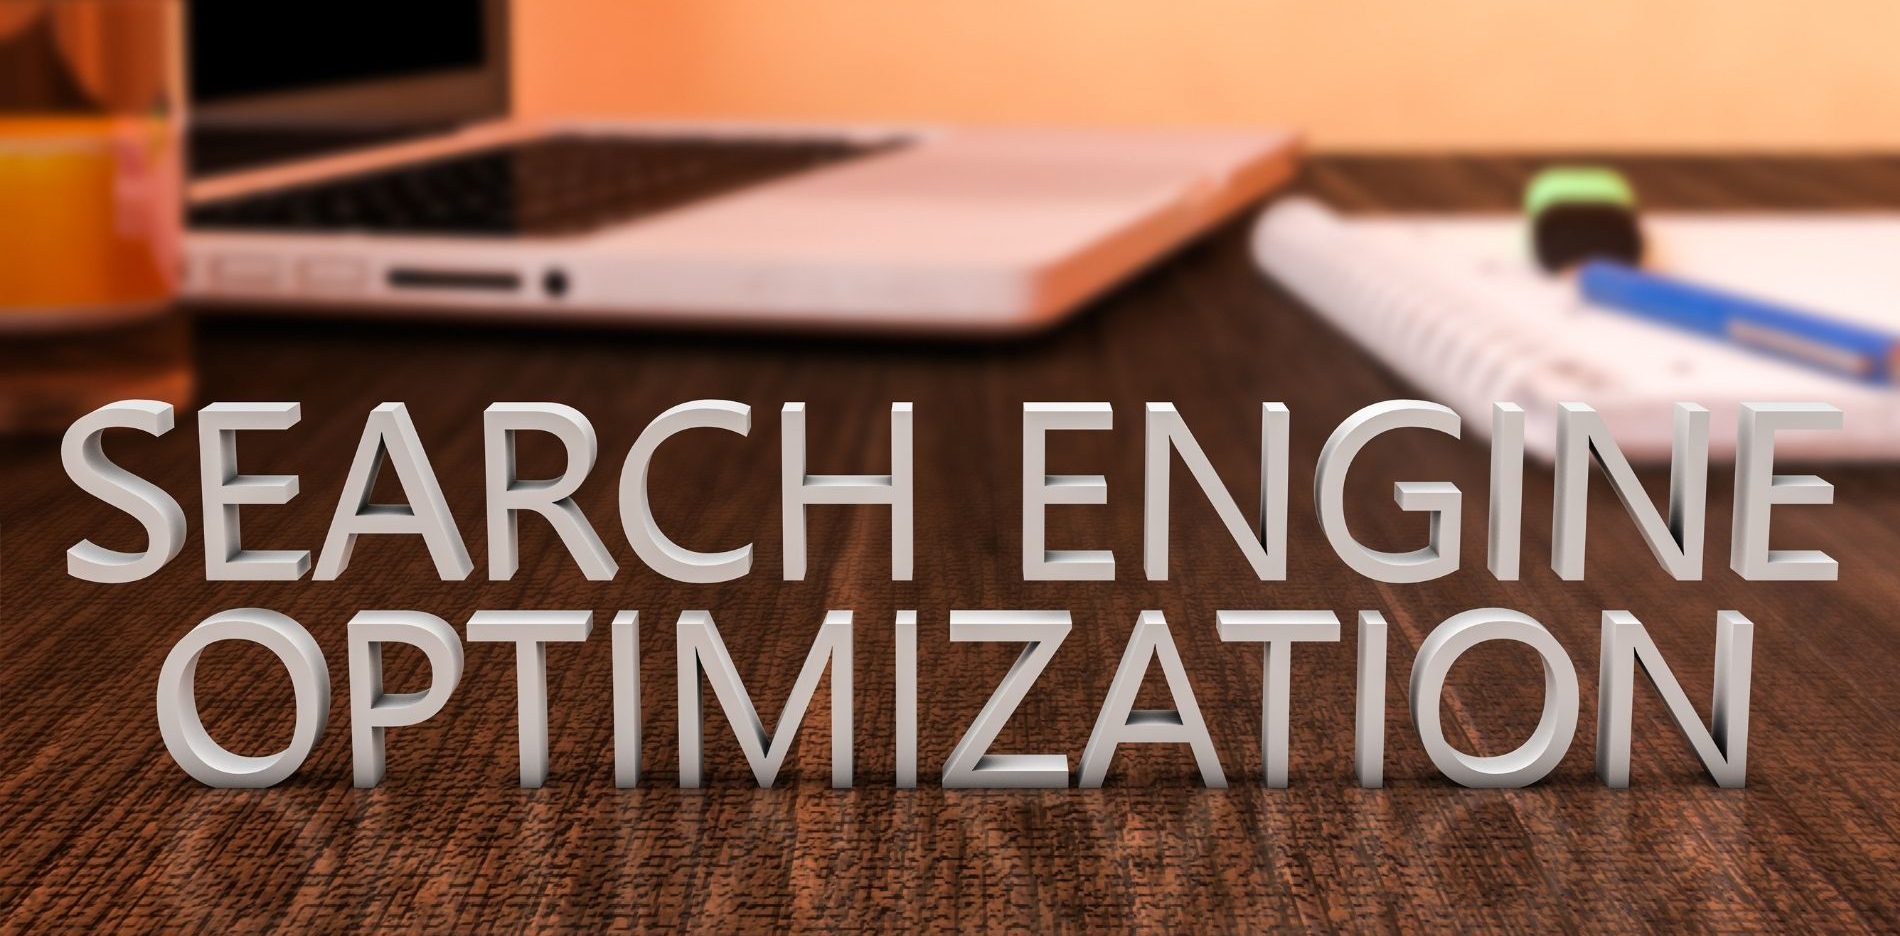 Global Search Engine Optimization Services Market Overview And Prospects